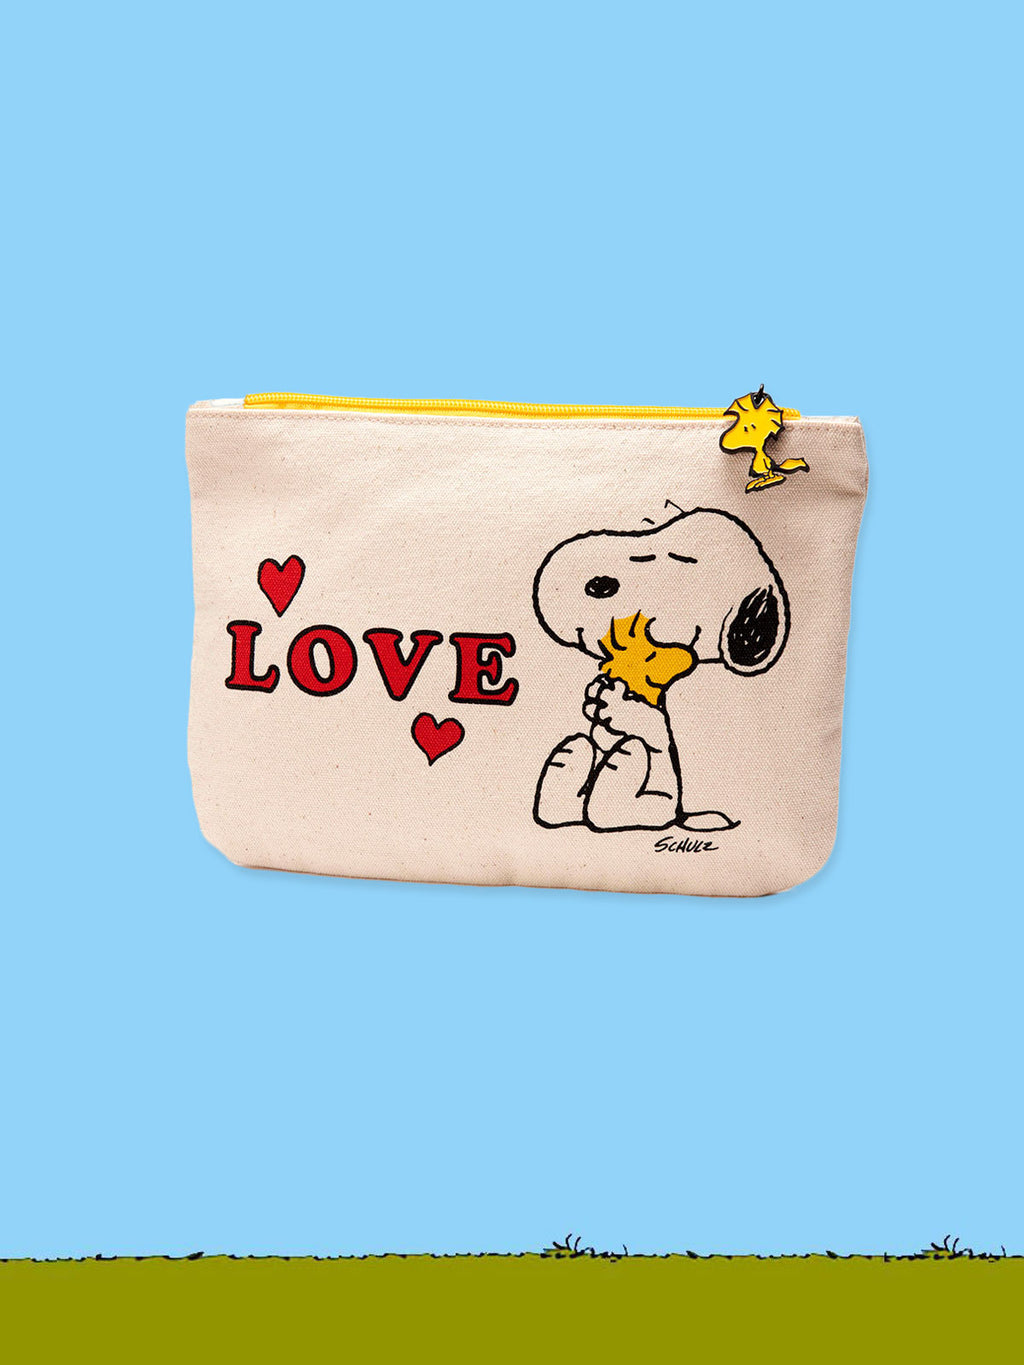 Peanuts Printed Cotton Pouch - Snoopy Love